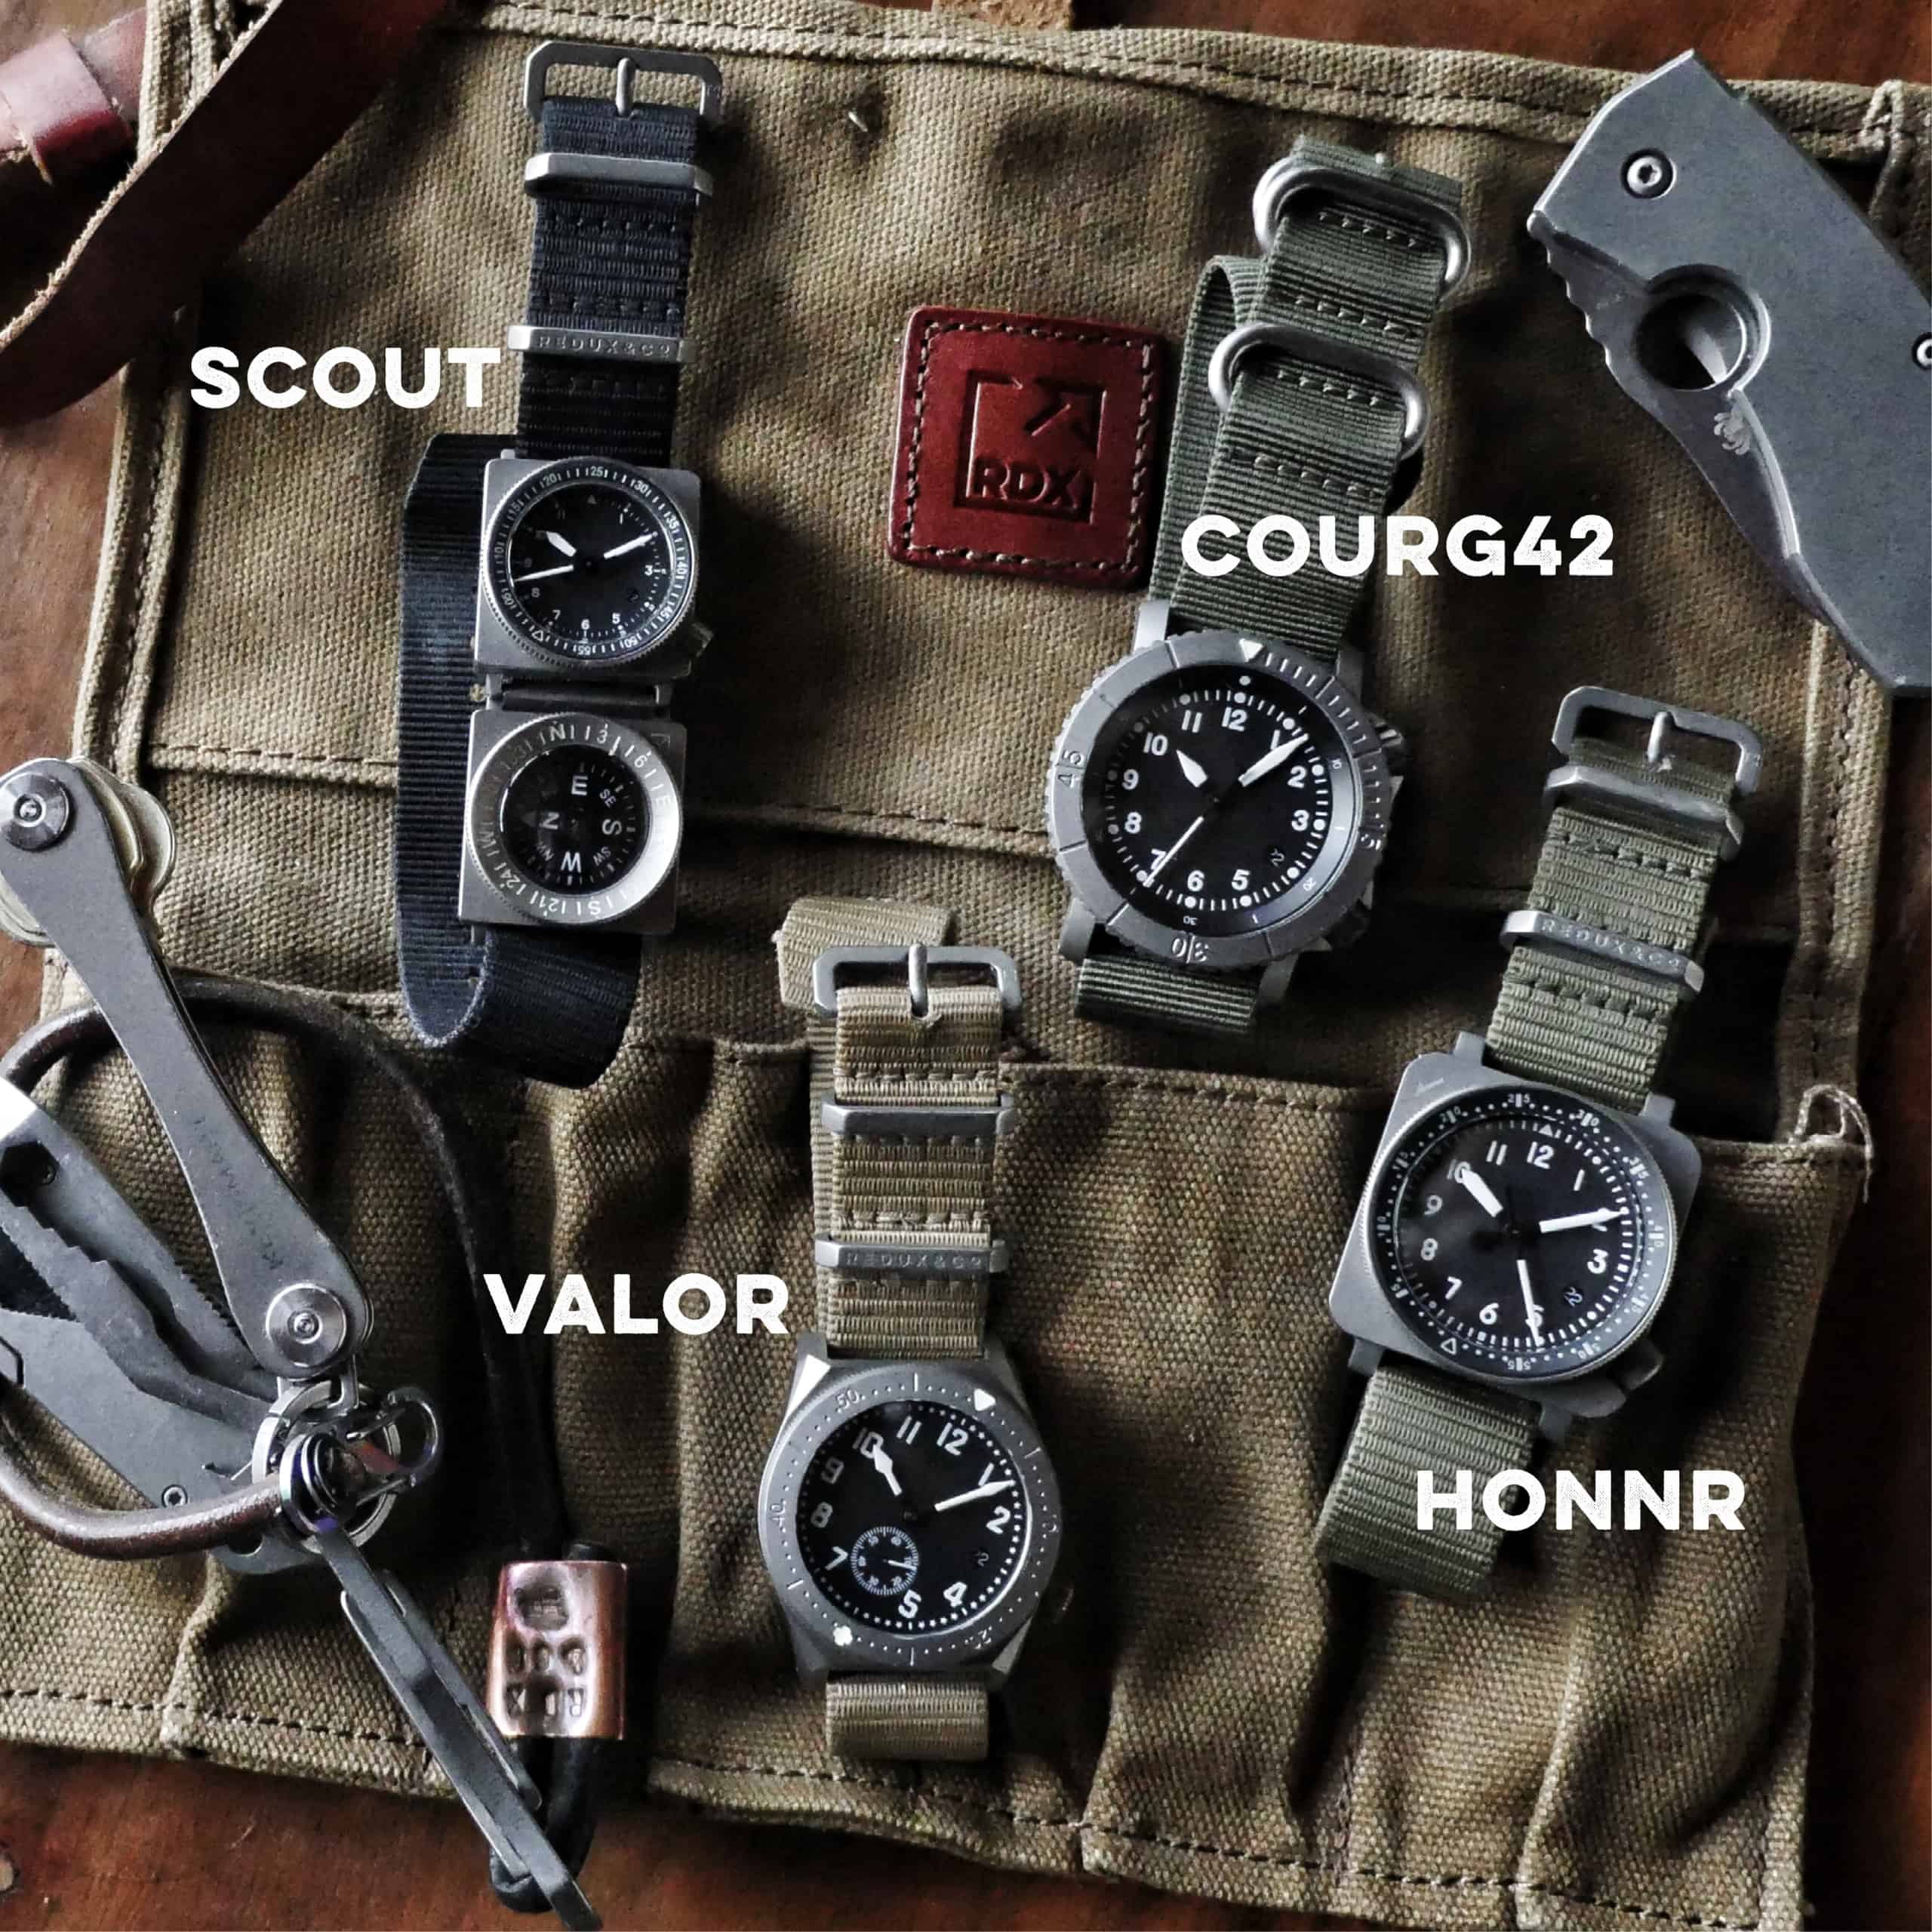 Introducing New Titanium Pilot-Diver Mission Watches From Redux & Co